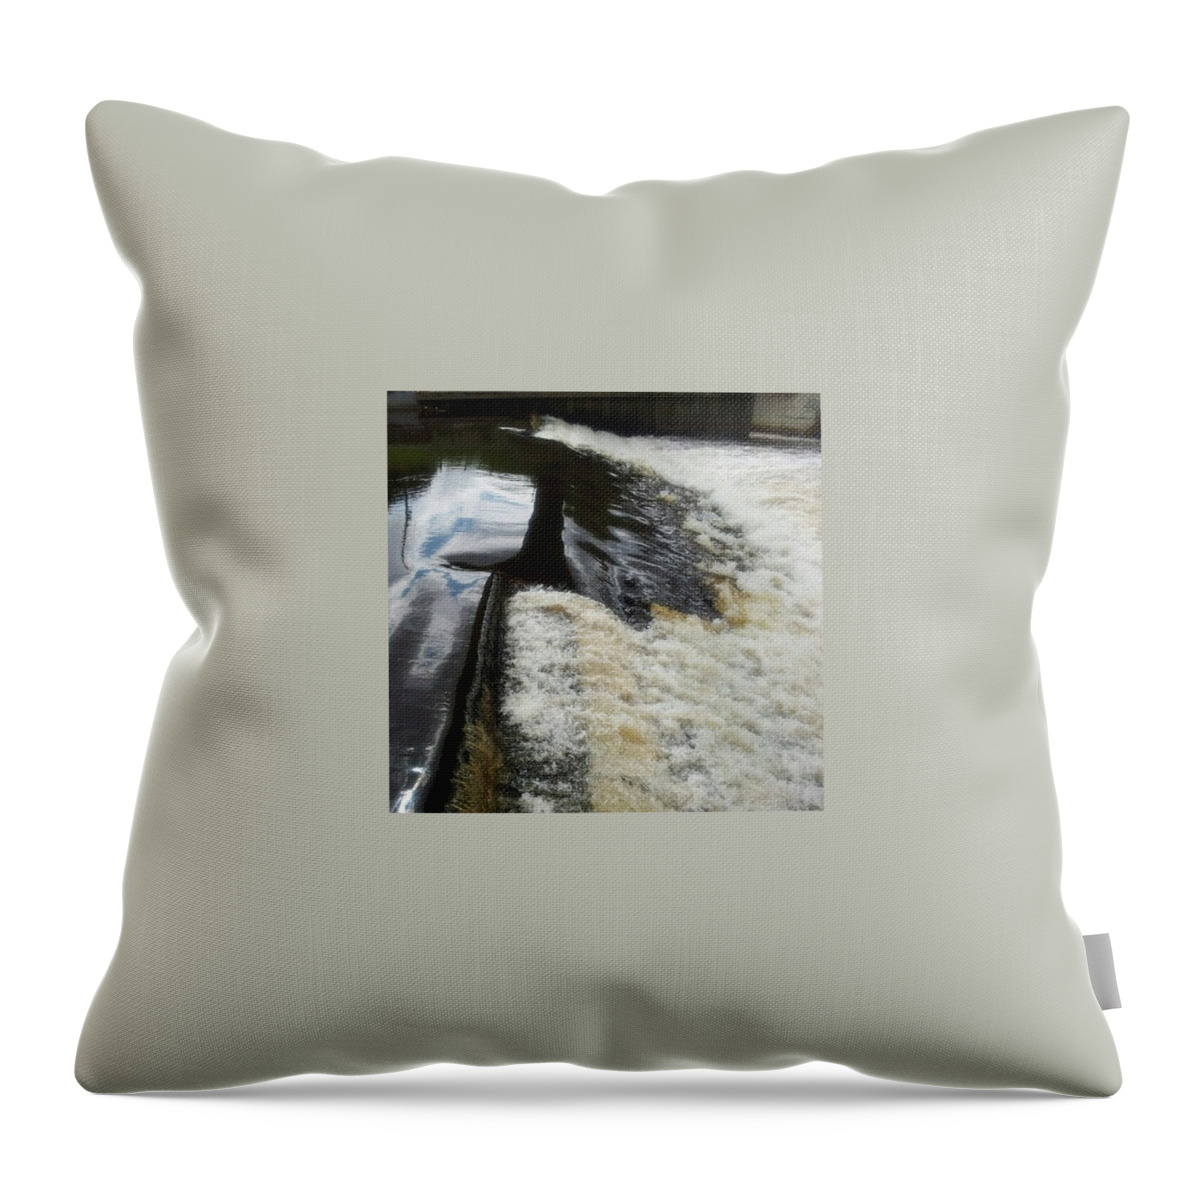  Throw Pillow featuring the photograph Fall At Paul Mccartney's River Mersey by Abbie Shores